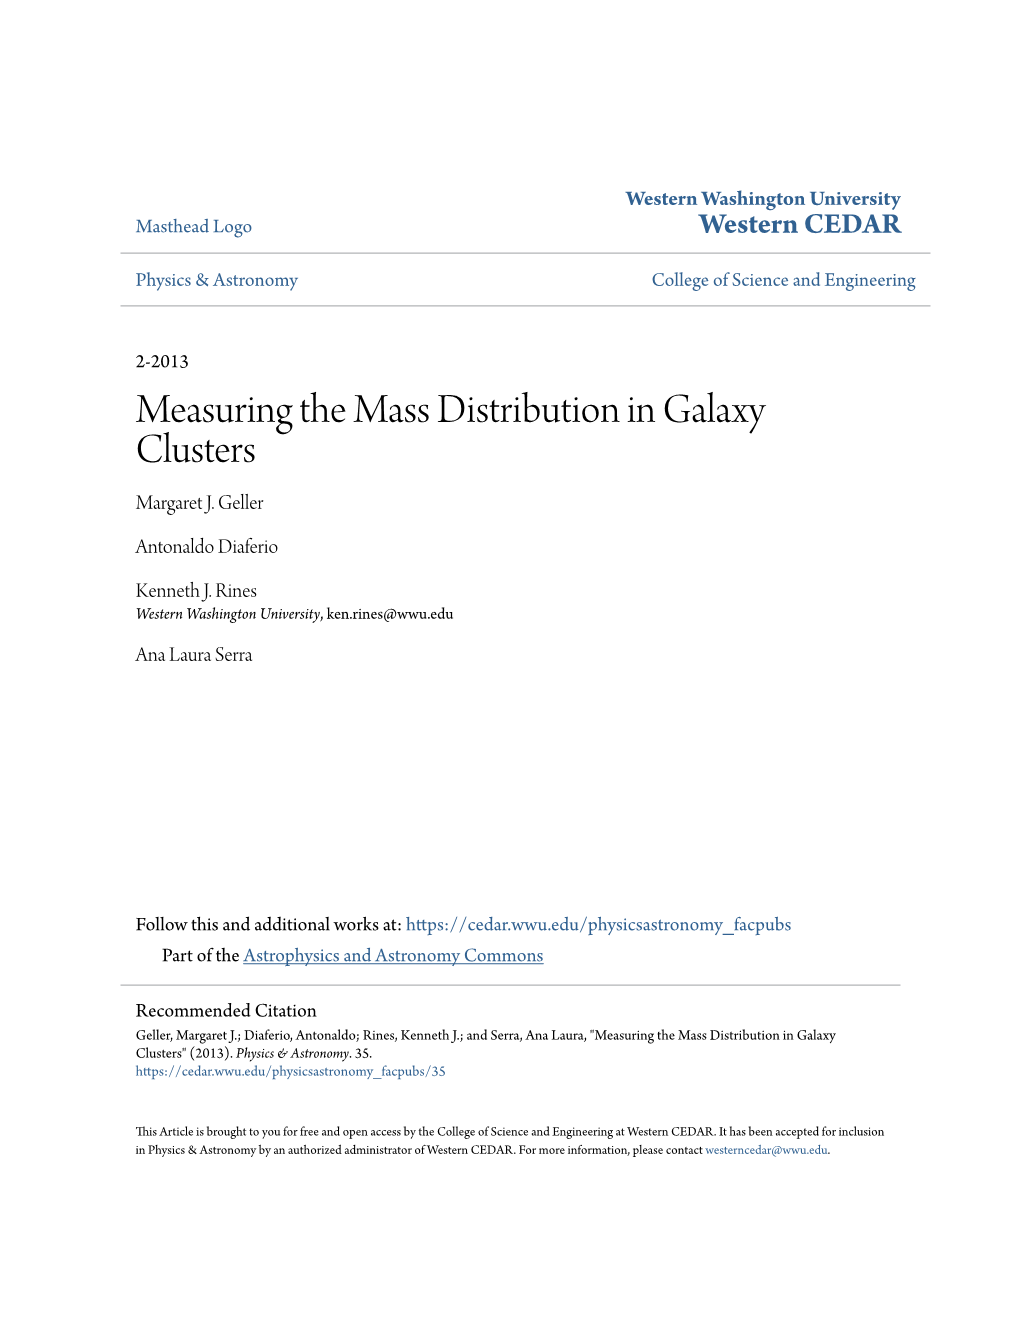 Measuring the Mass Distribution in Galaxy Clusters Margaret J